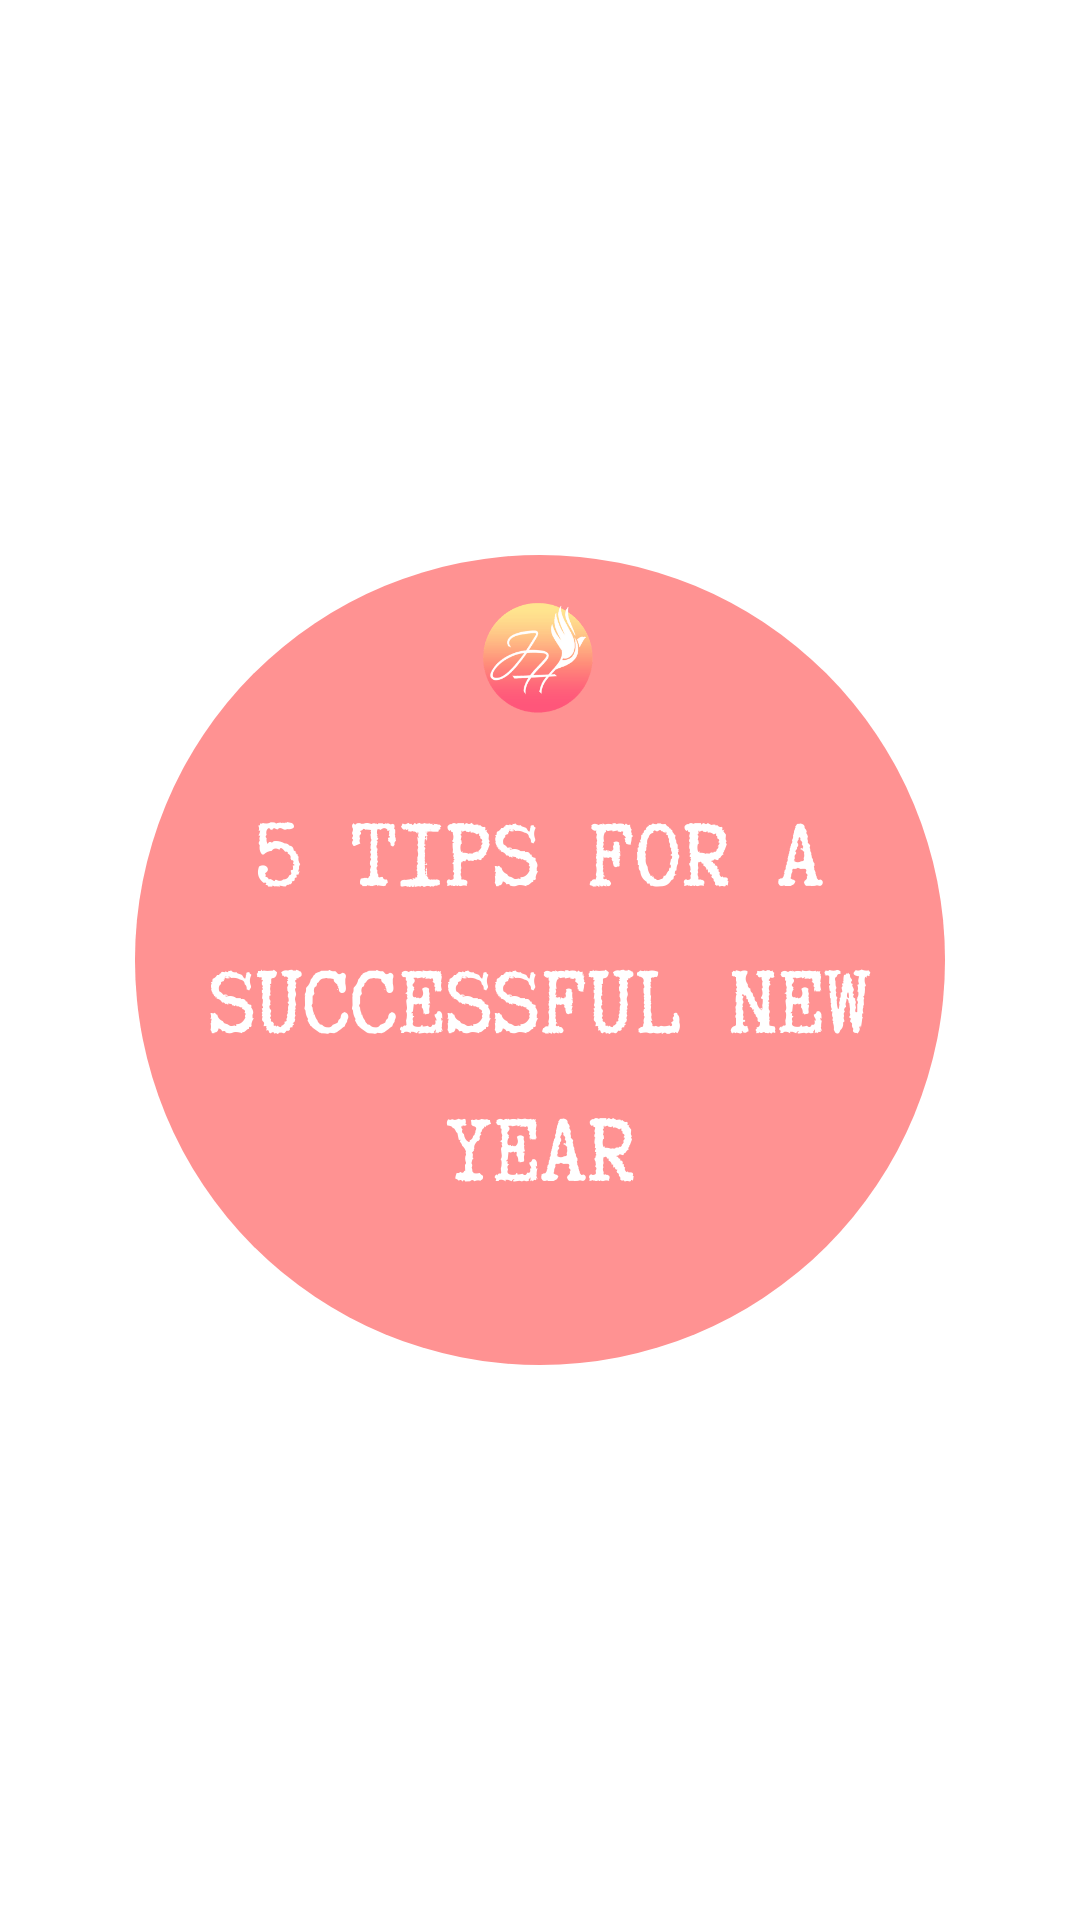 5 TIPS FOR A SUCCESSFUL NEW YEAR